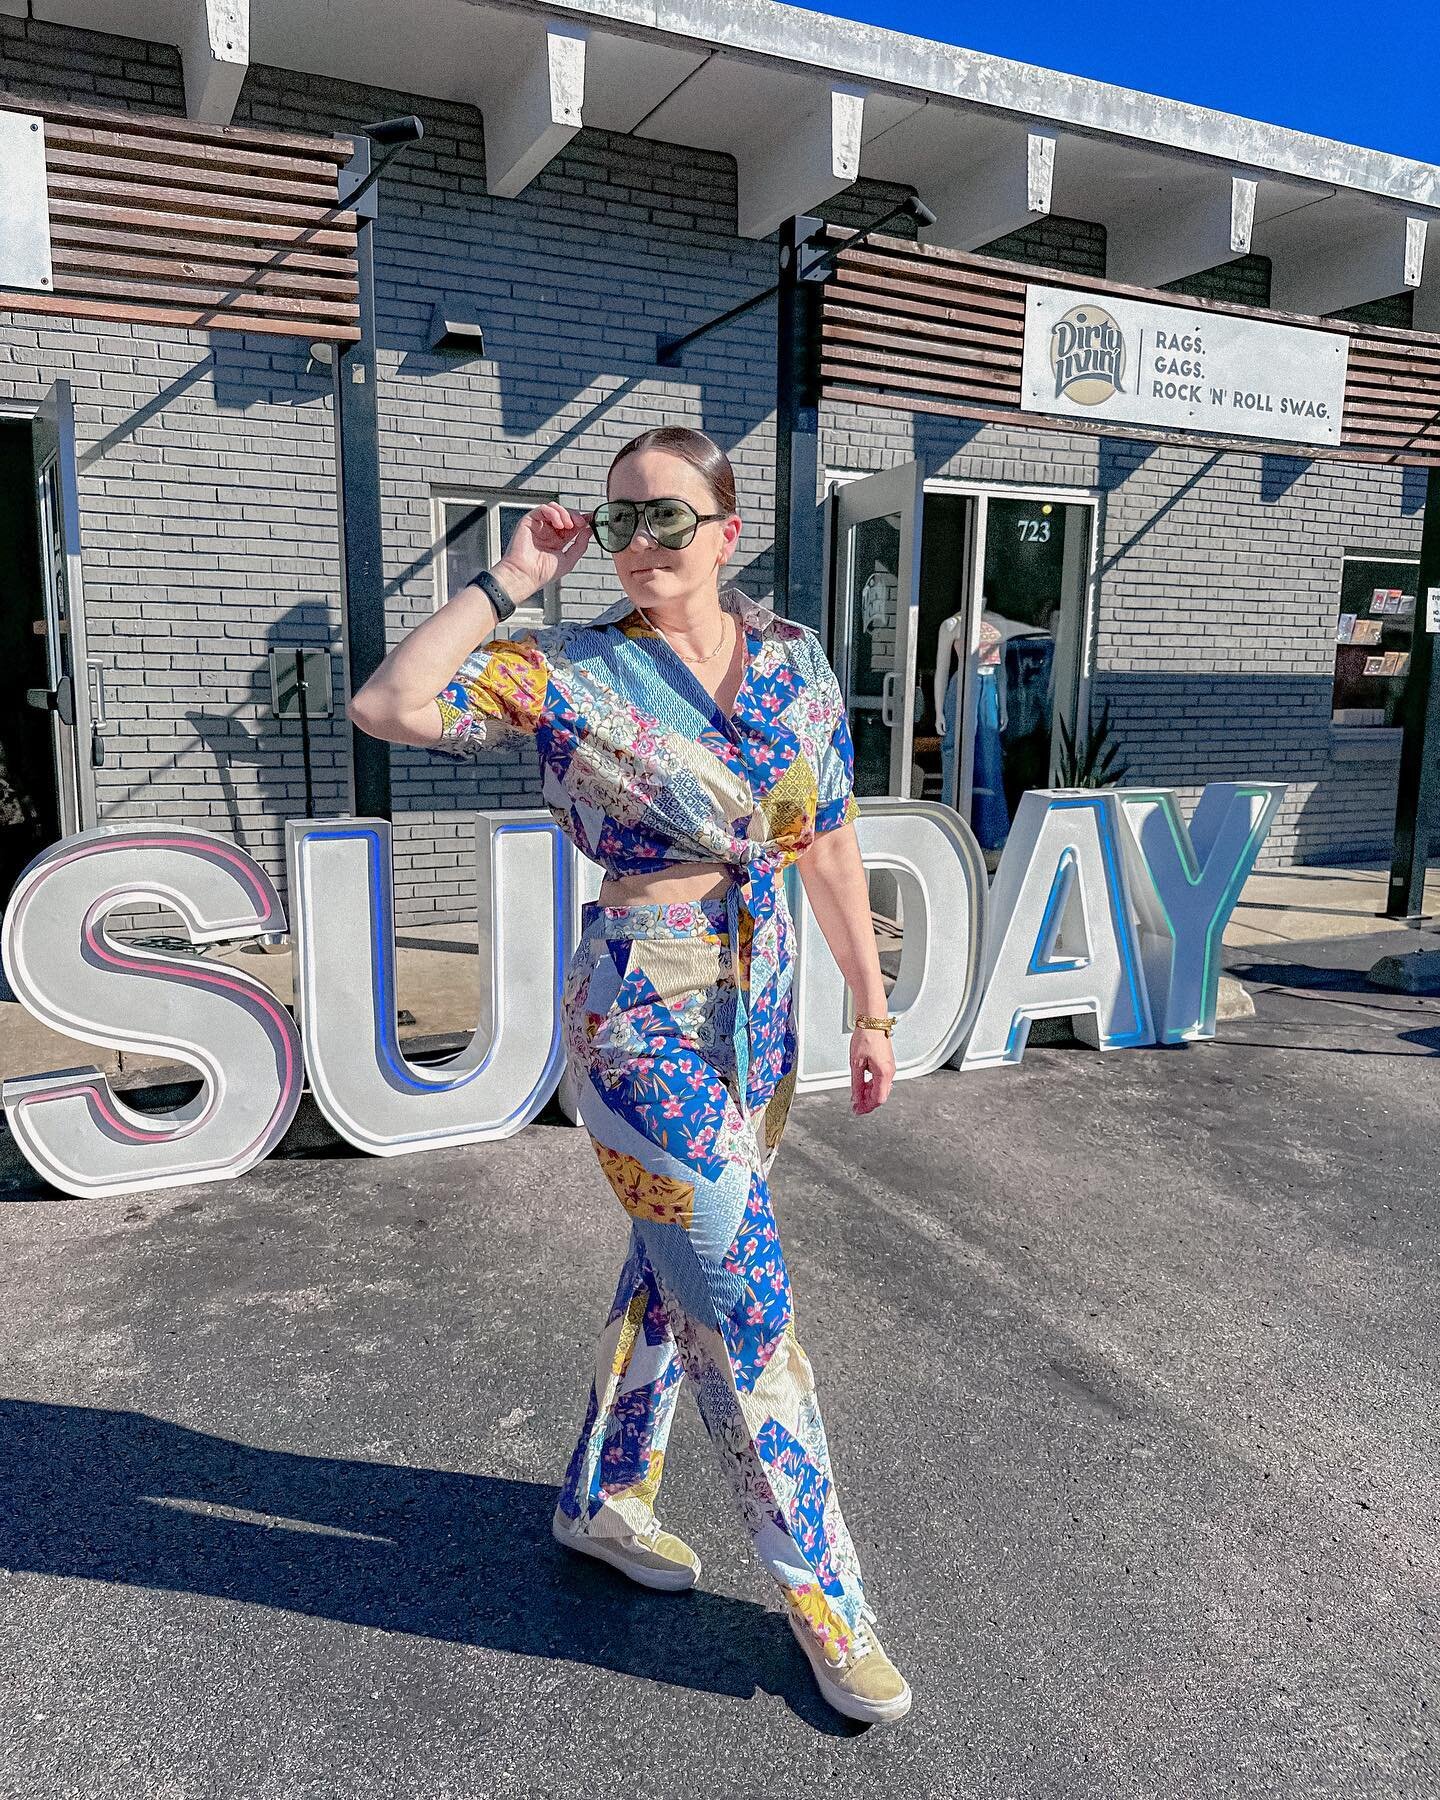 Sunday was a Fun Day!! ☀️😎
.
Outfit by @dirty_livin
.
We loved having our letters out for the @shopsatportereast First Sunday Market! Have you been? If not your missing out on a great time!
.
#LedMarquee #LedMarqueeNashville #MarqueeLetters #Nashvil